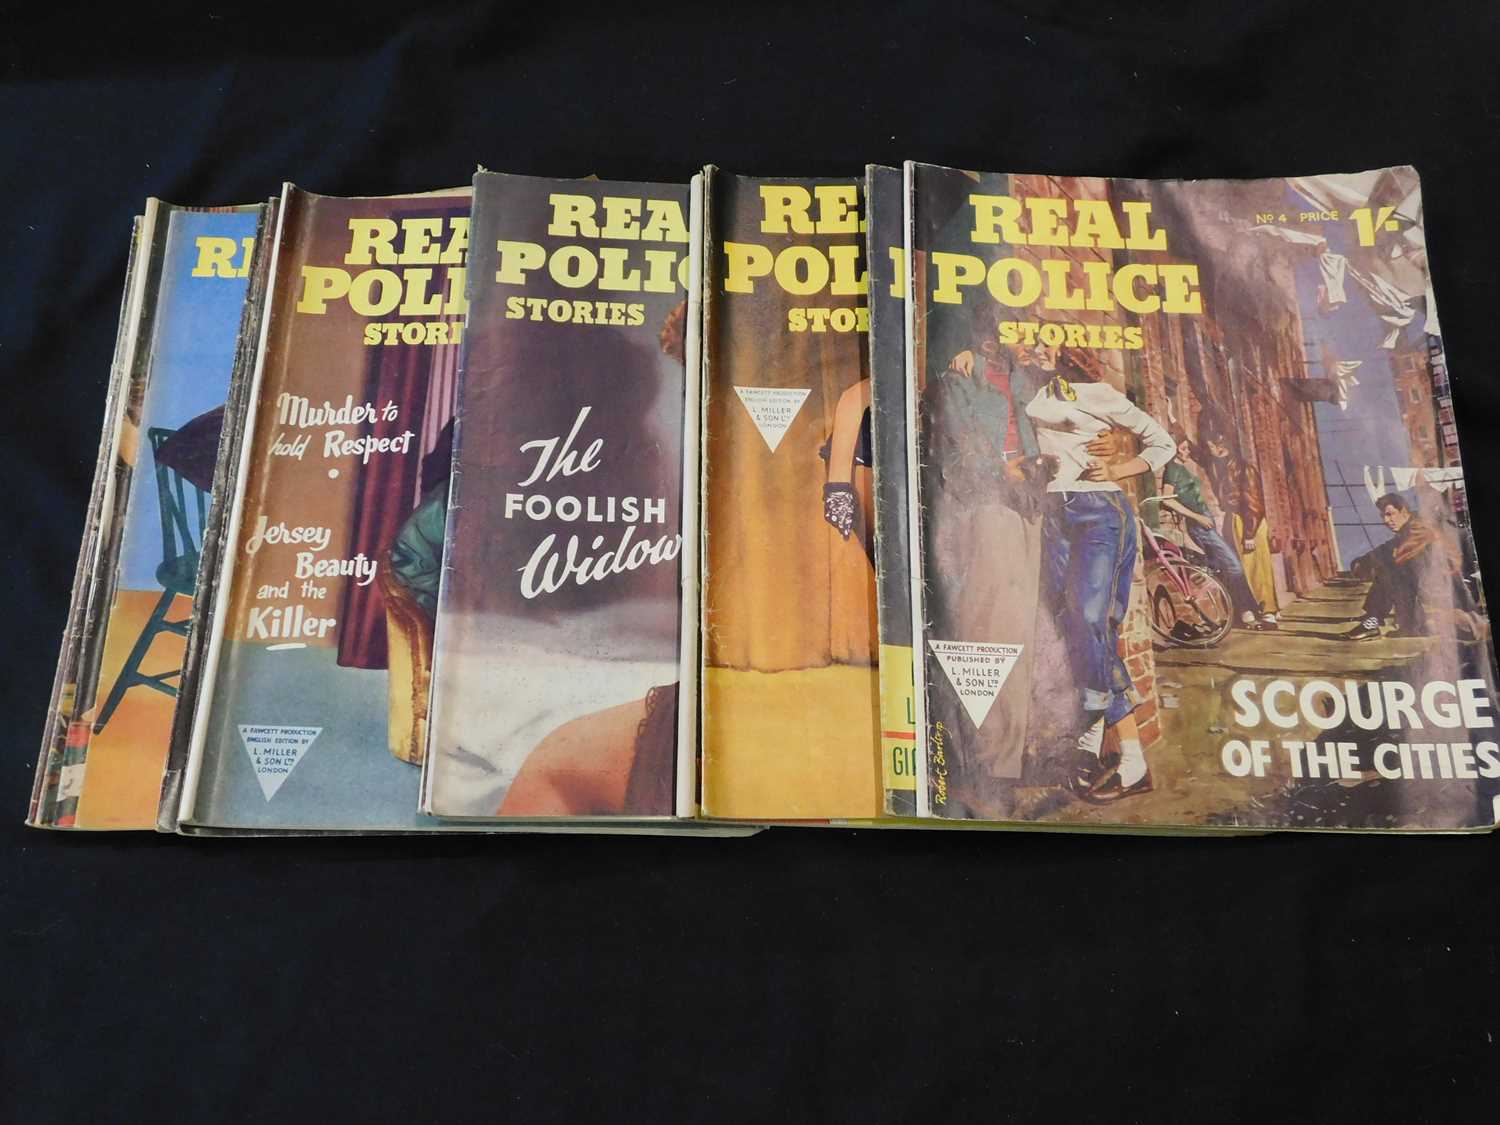 REAL POLICE STORIES: London, Fawcett/Len Miller 1953-58, 16 assorted issues 4to, original